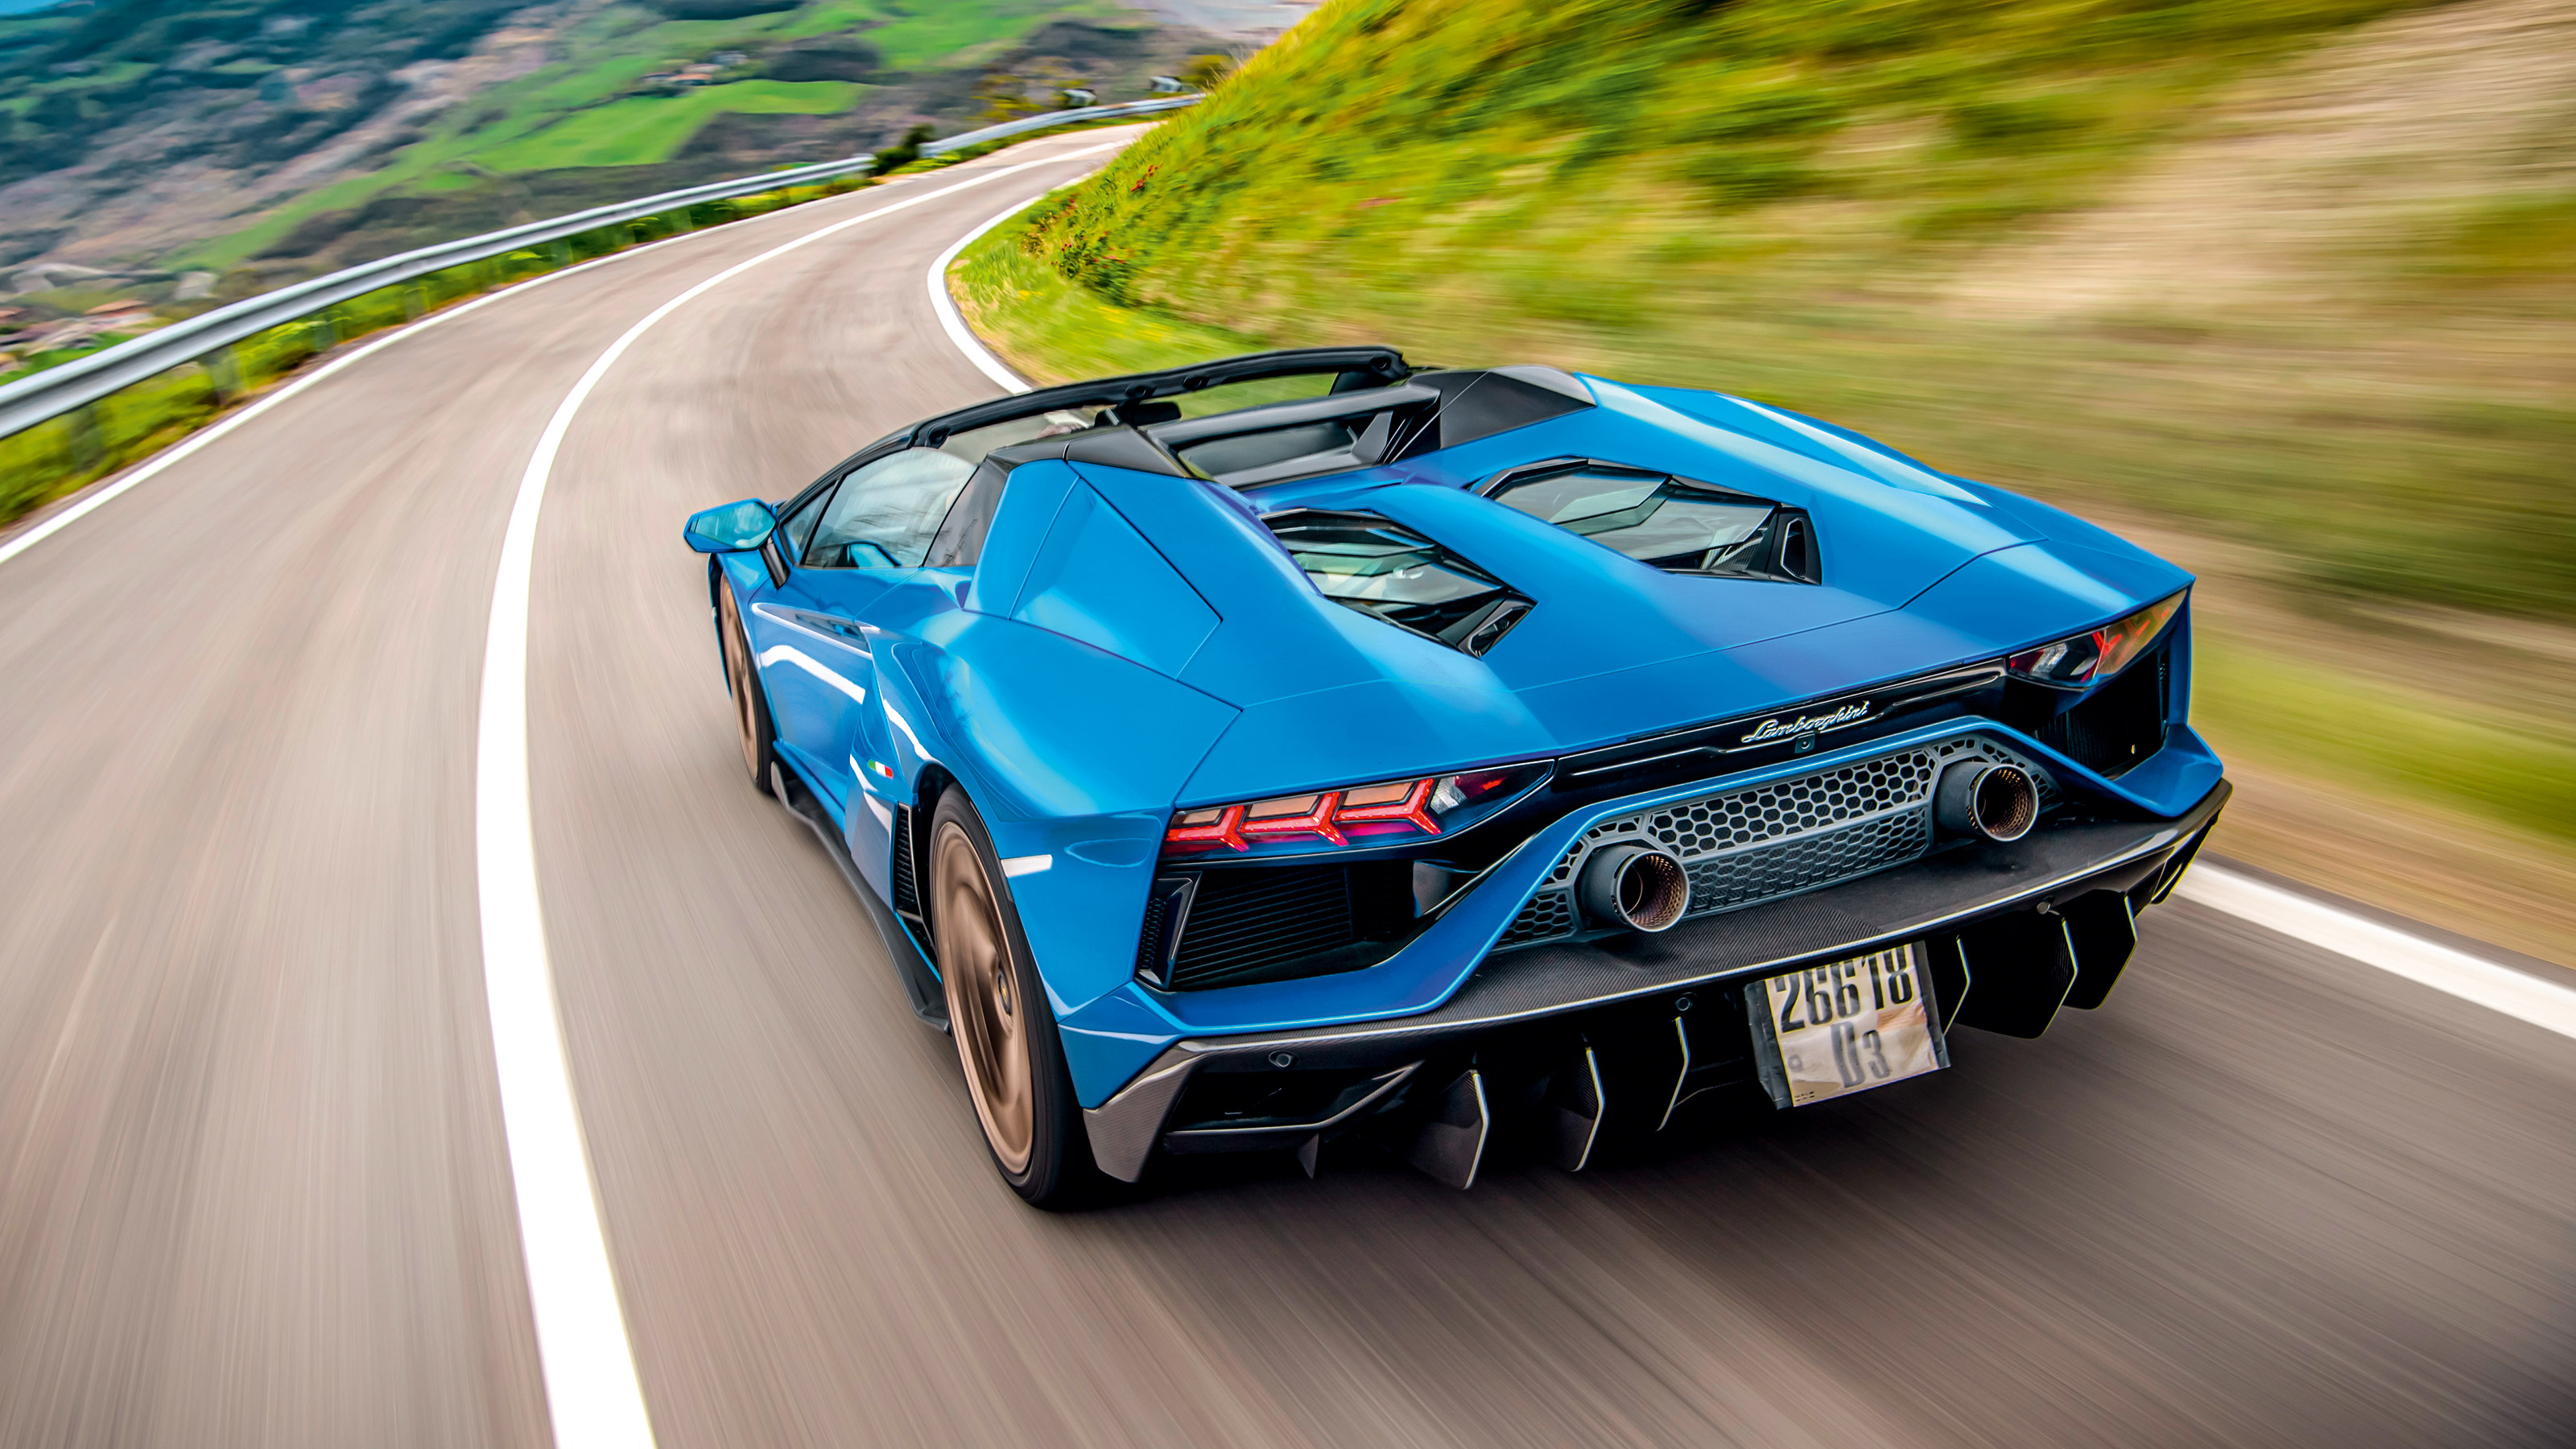 2022 Lamborghini Aventador Ultimae Review: Is This The Ultimate